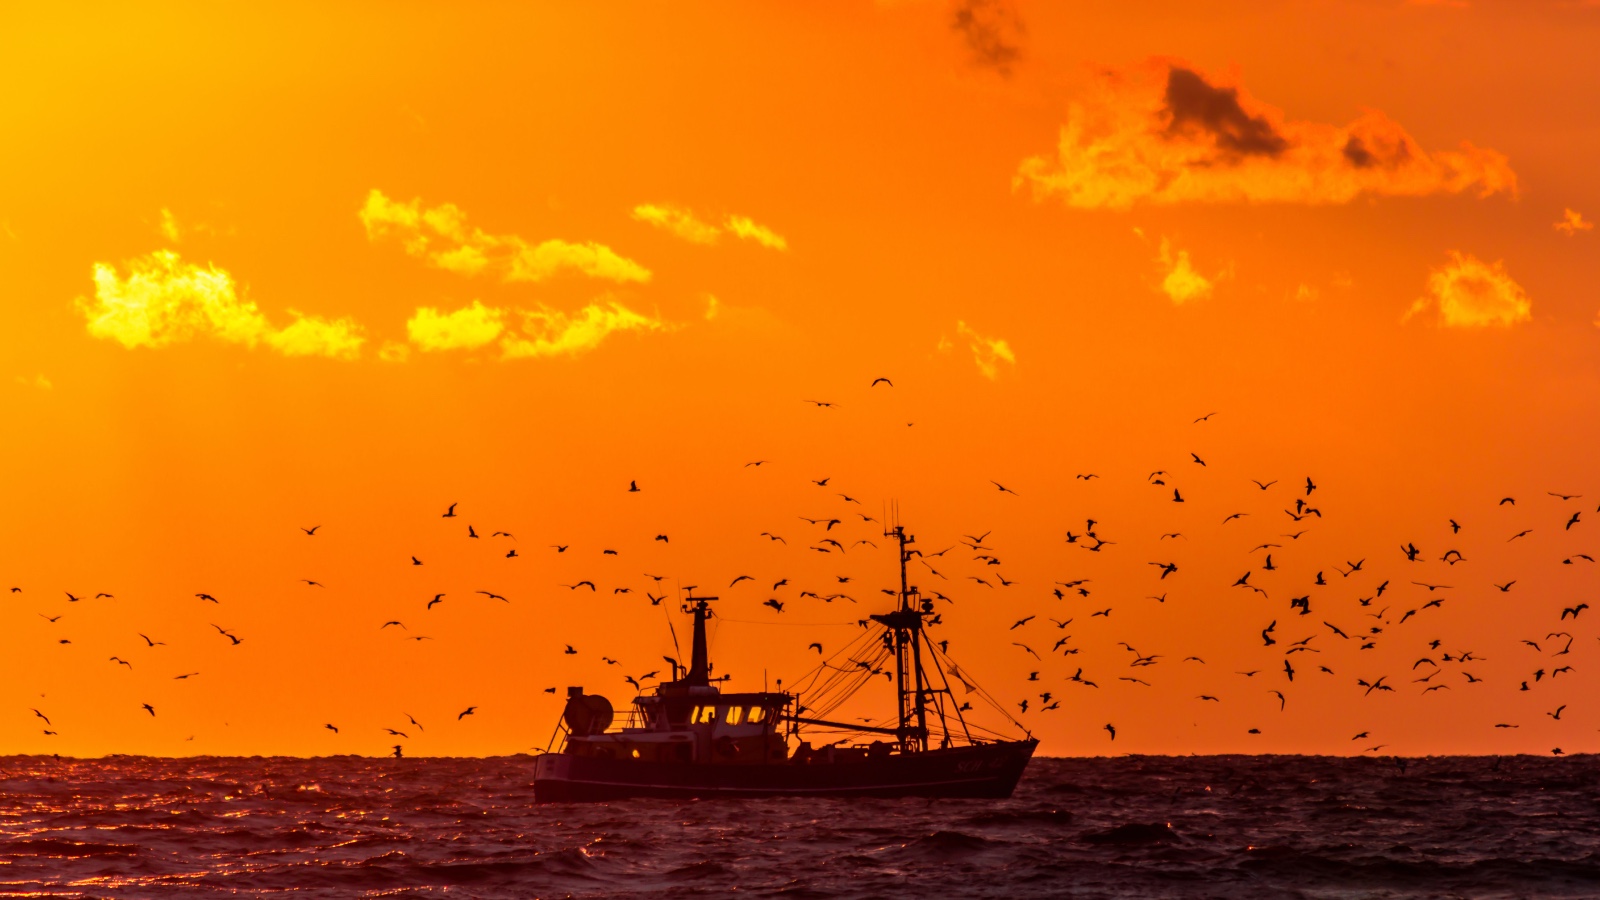 A fishing boat is surrounded by a flock of birds on the sea beneath an orange sky at sunset